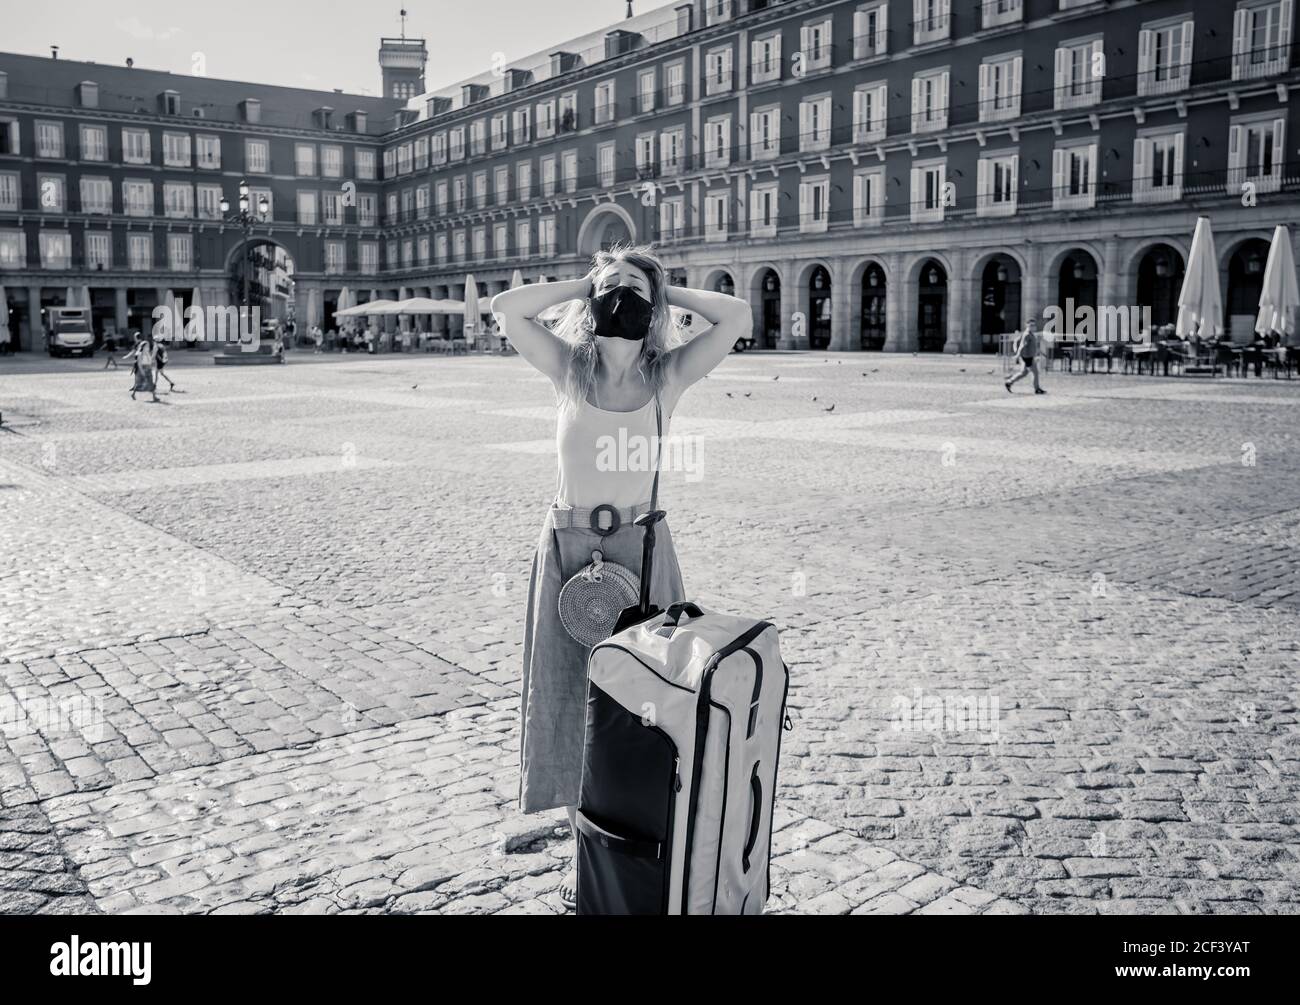 COVID-19 impact in tourism. Sad tourist wearing protective mask in Madrid Spain worried about coronavirus quarantine amid travel regulations. Vacation Stock Photo